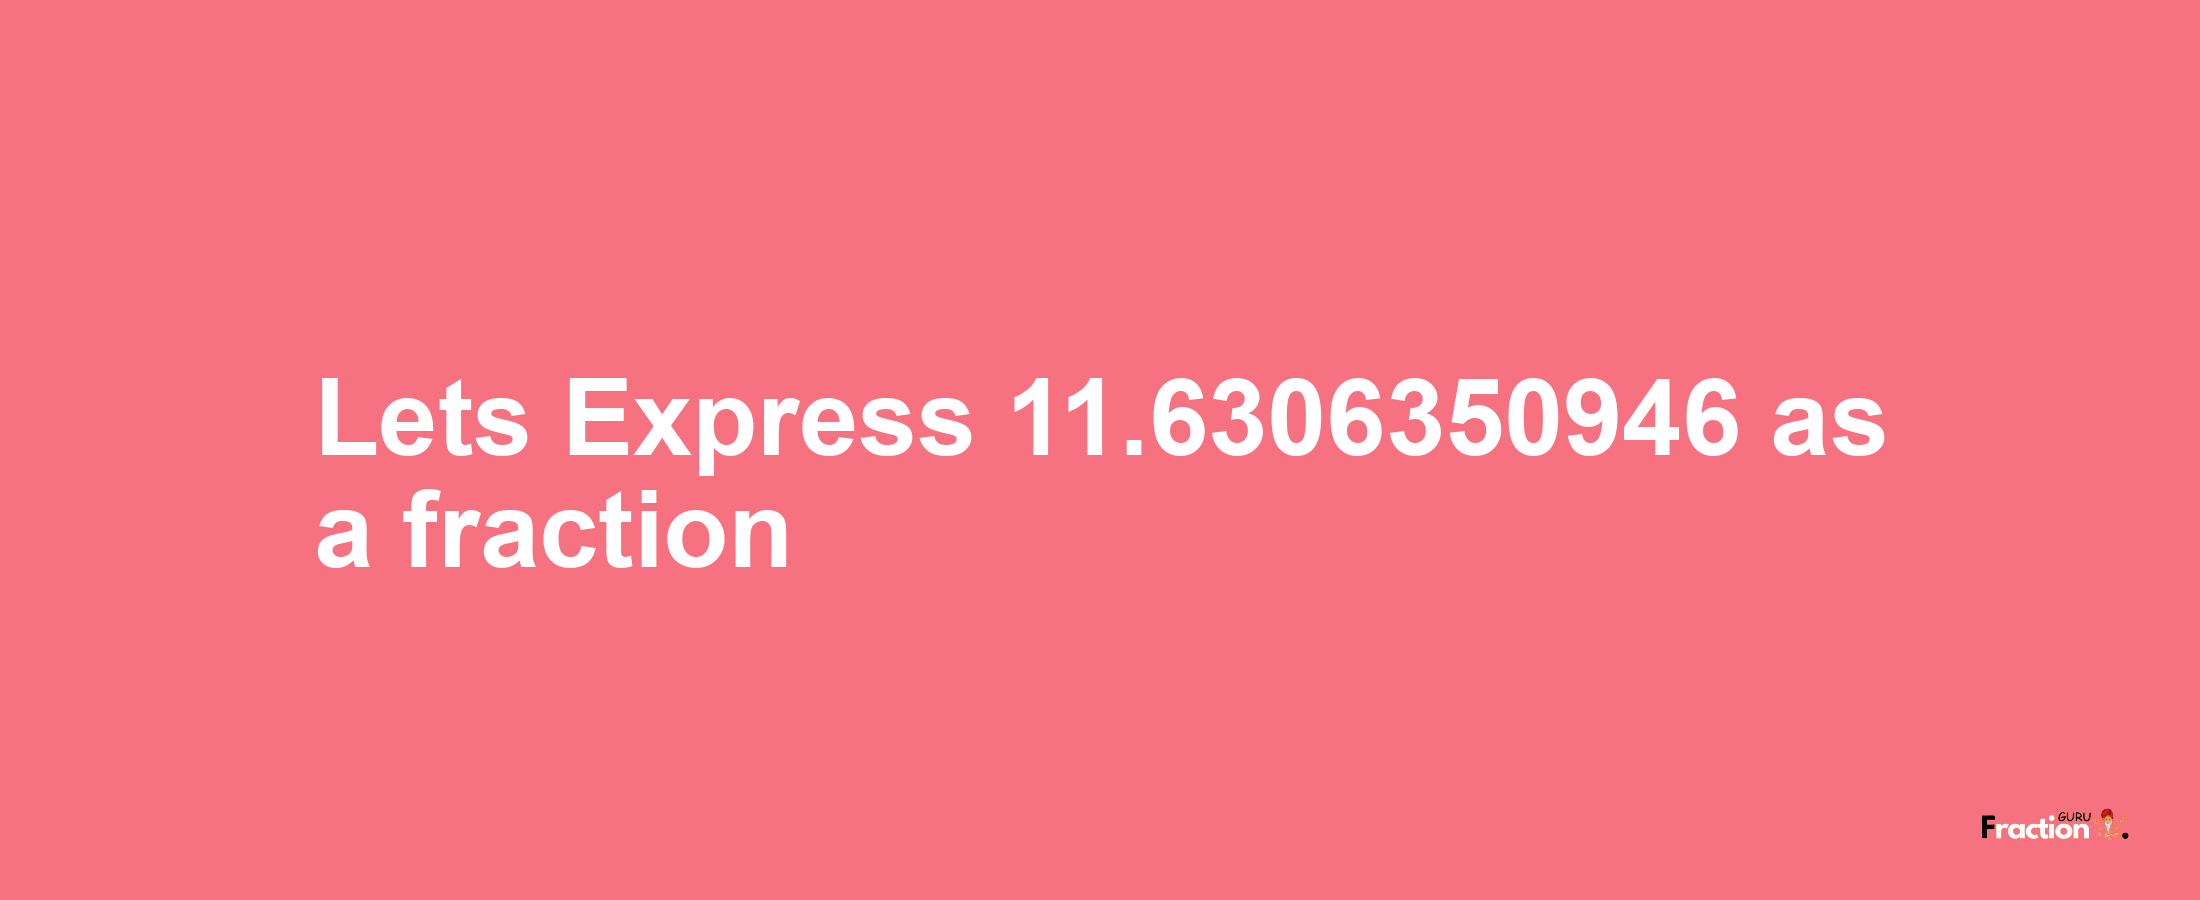 Lets Express 11.6306350946 as afraction